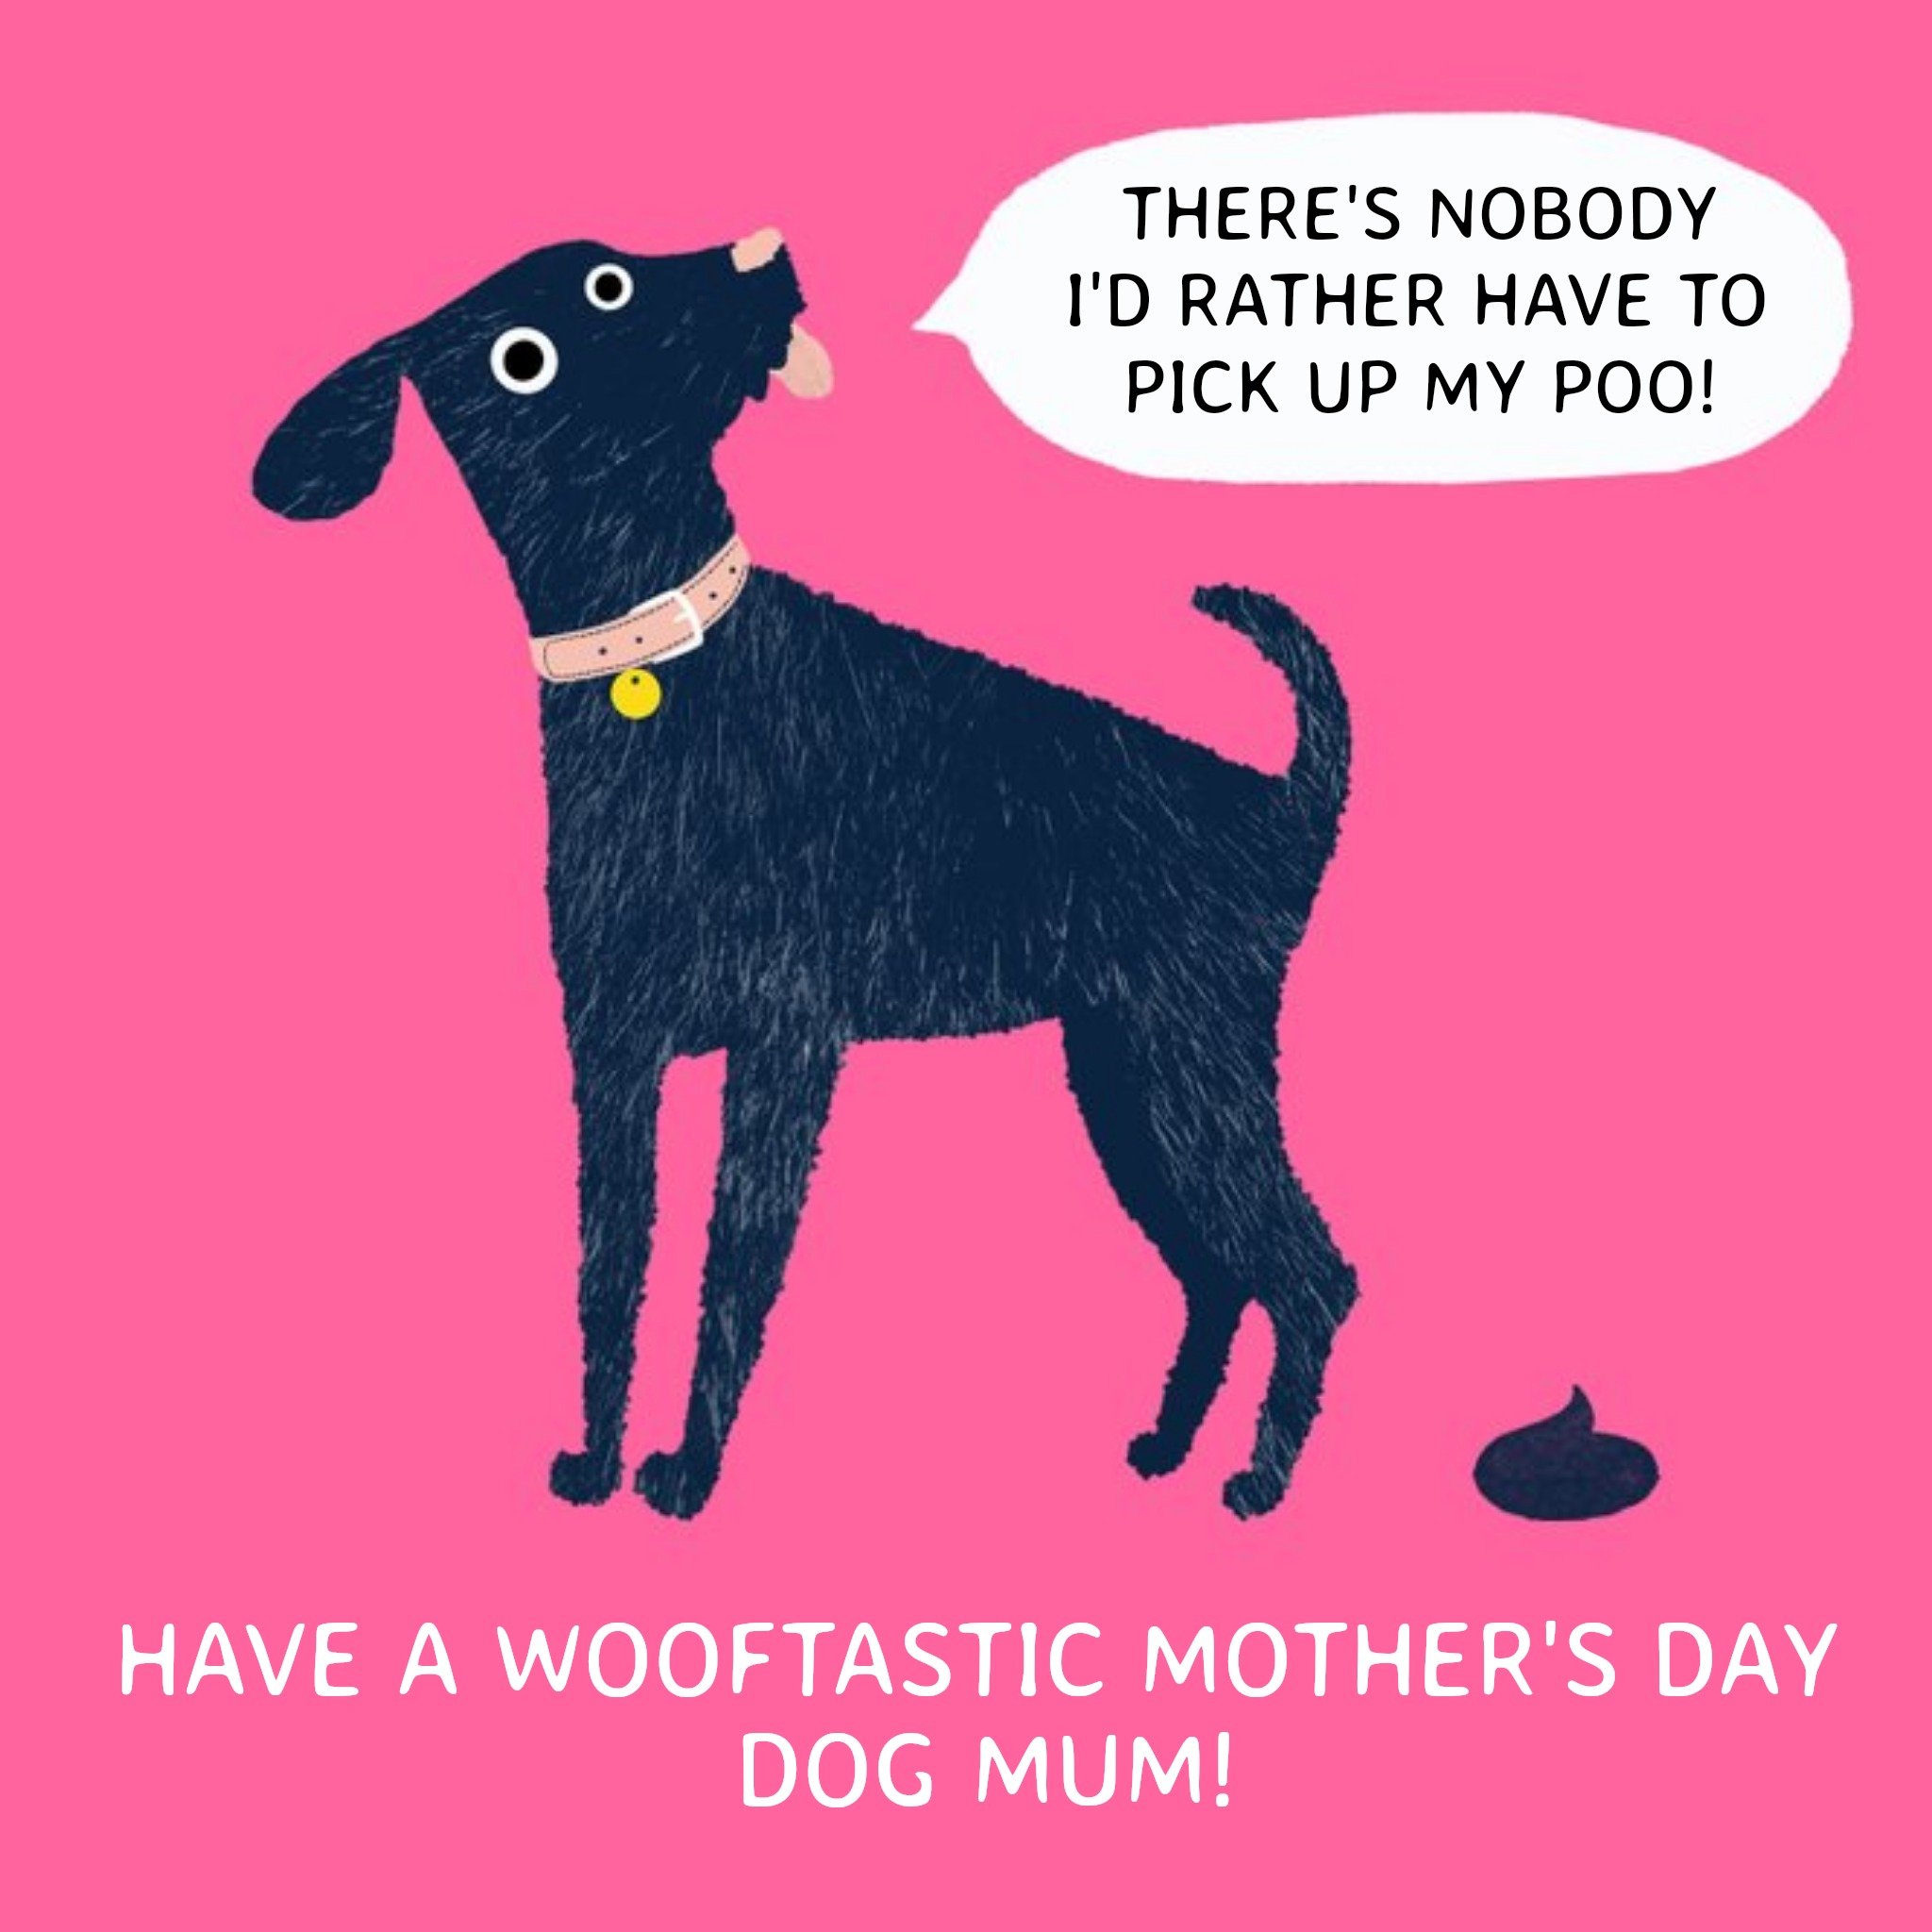 Moonpig There's Nobody I'd Rather Pick Up My Poo Funny Mother' Day Card From The Dog, Large